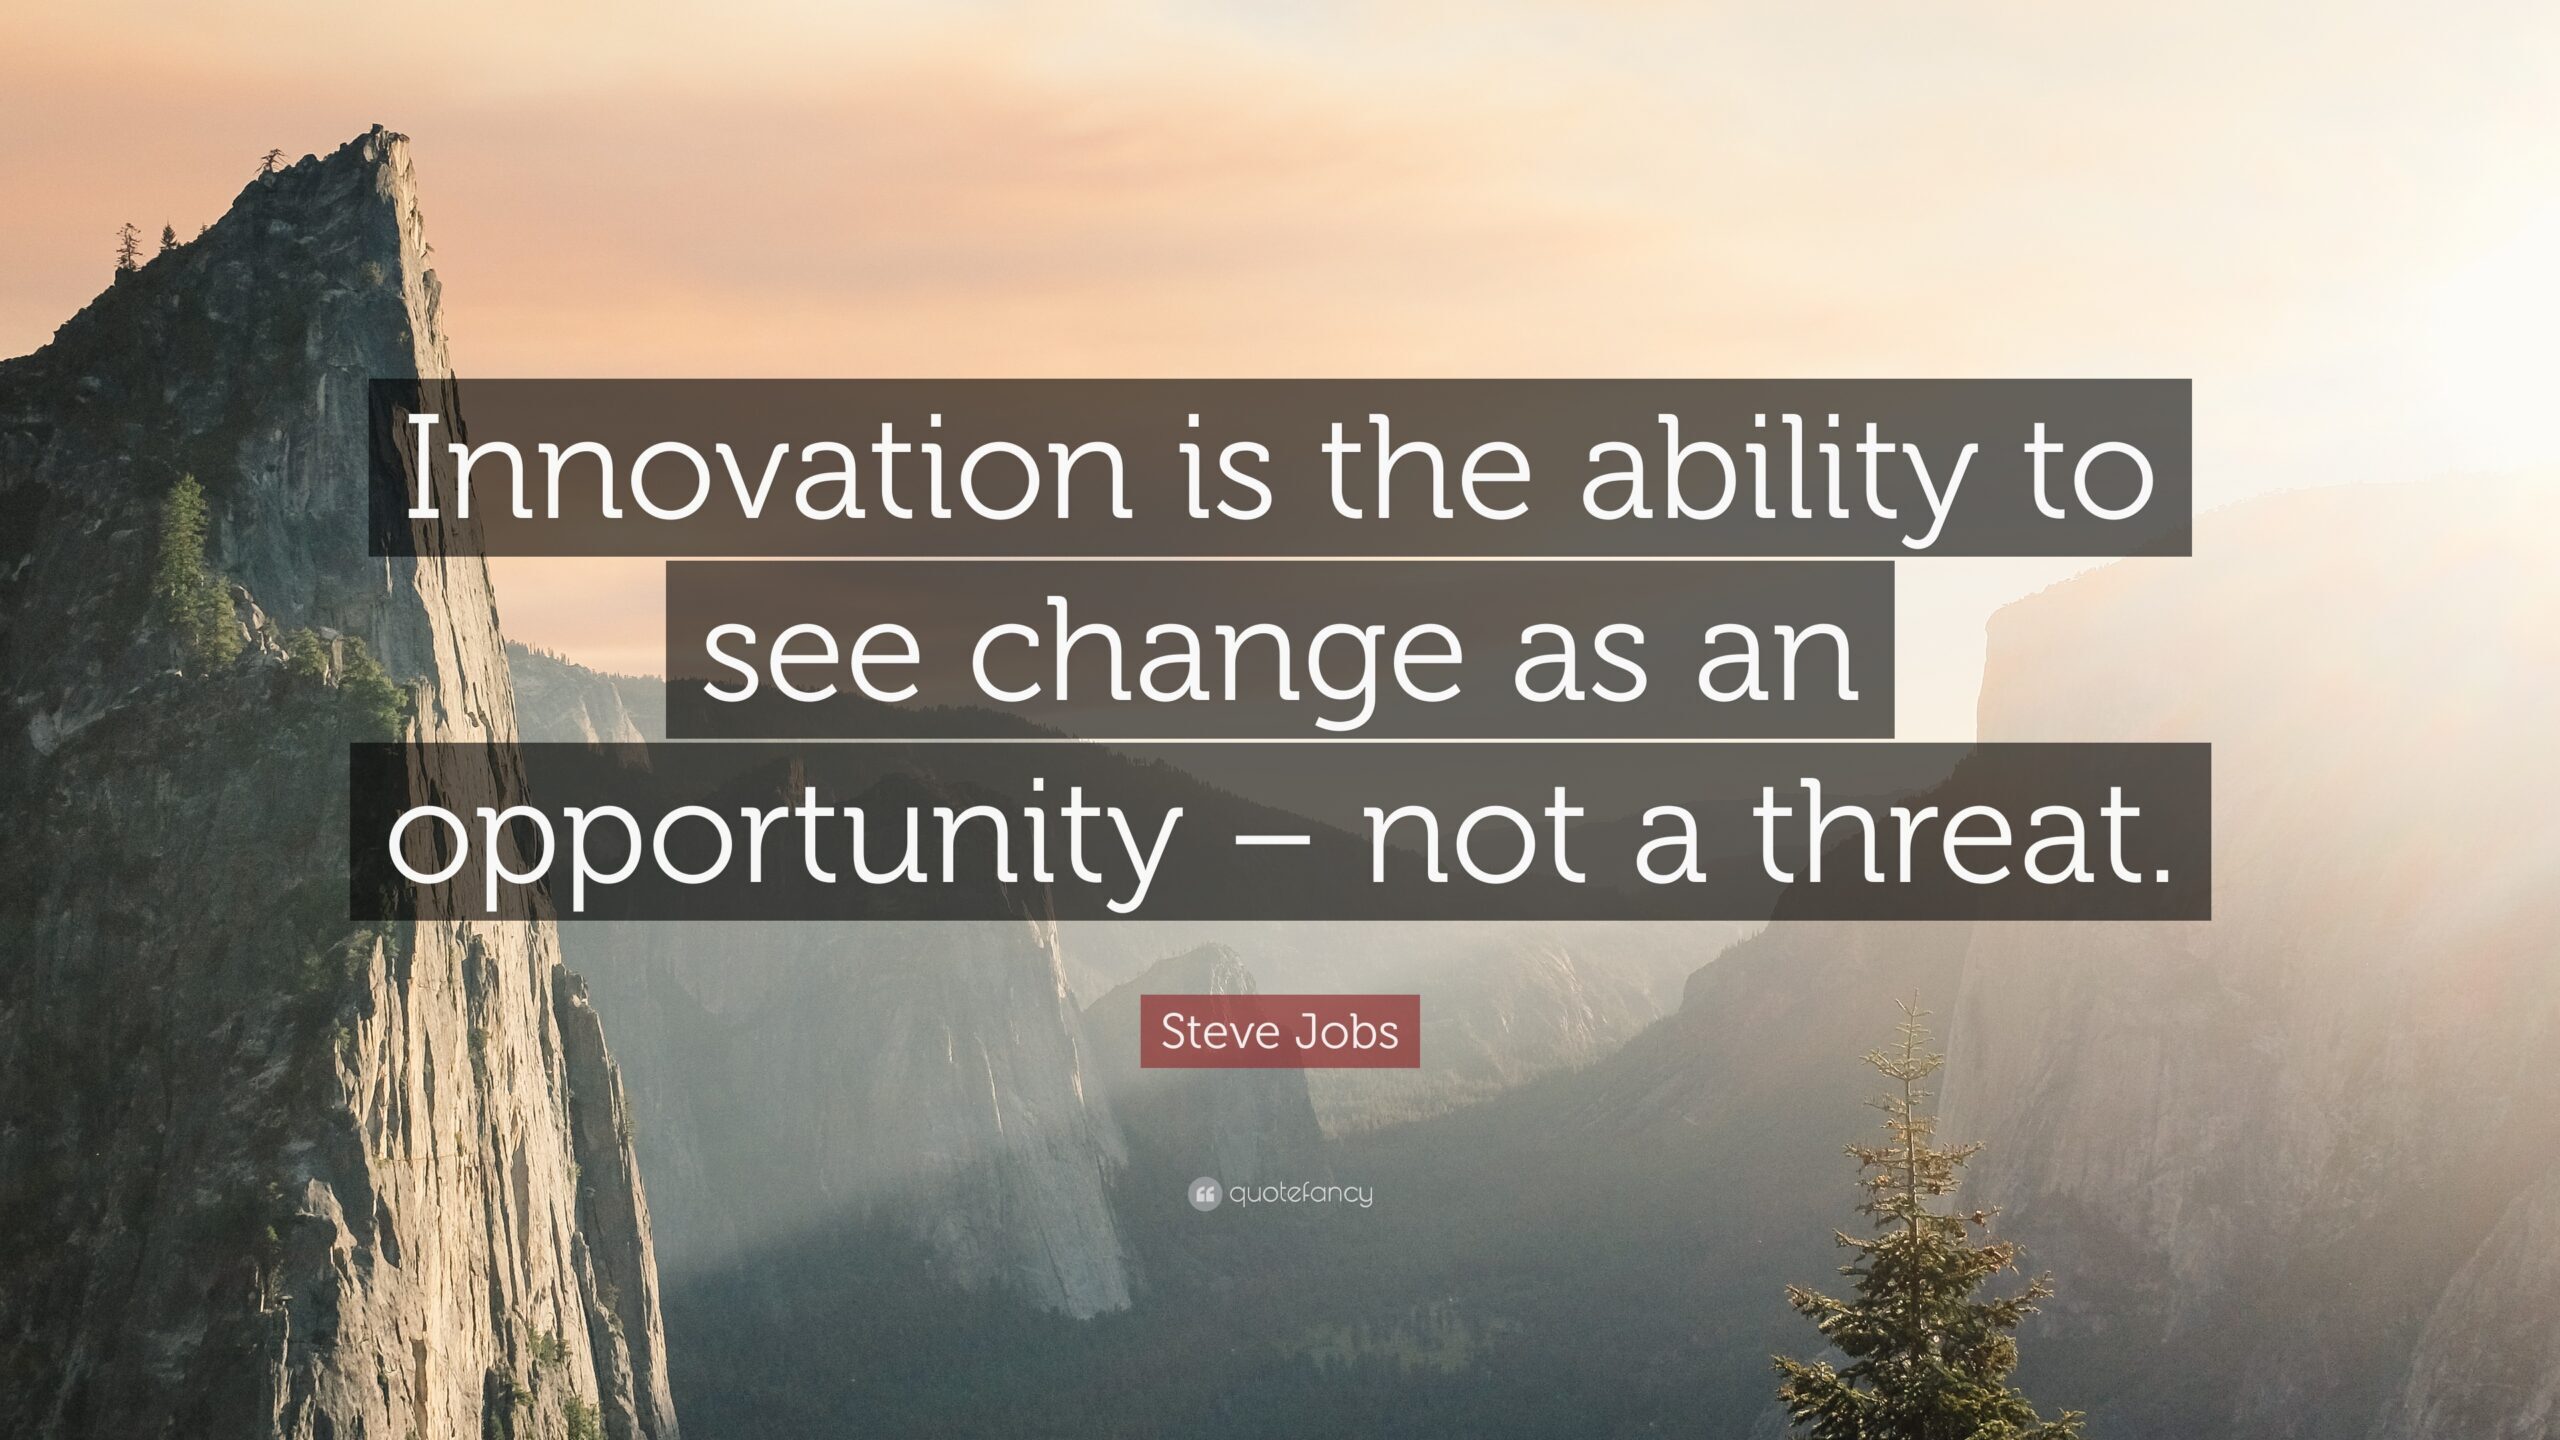 491360-steve-jobs-quote-innovation-is-the-ability-to-see-change-as-an-8086006